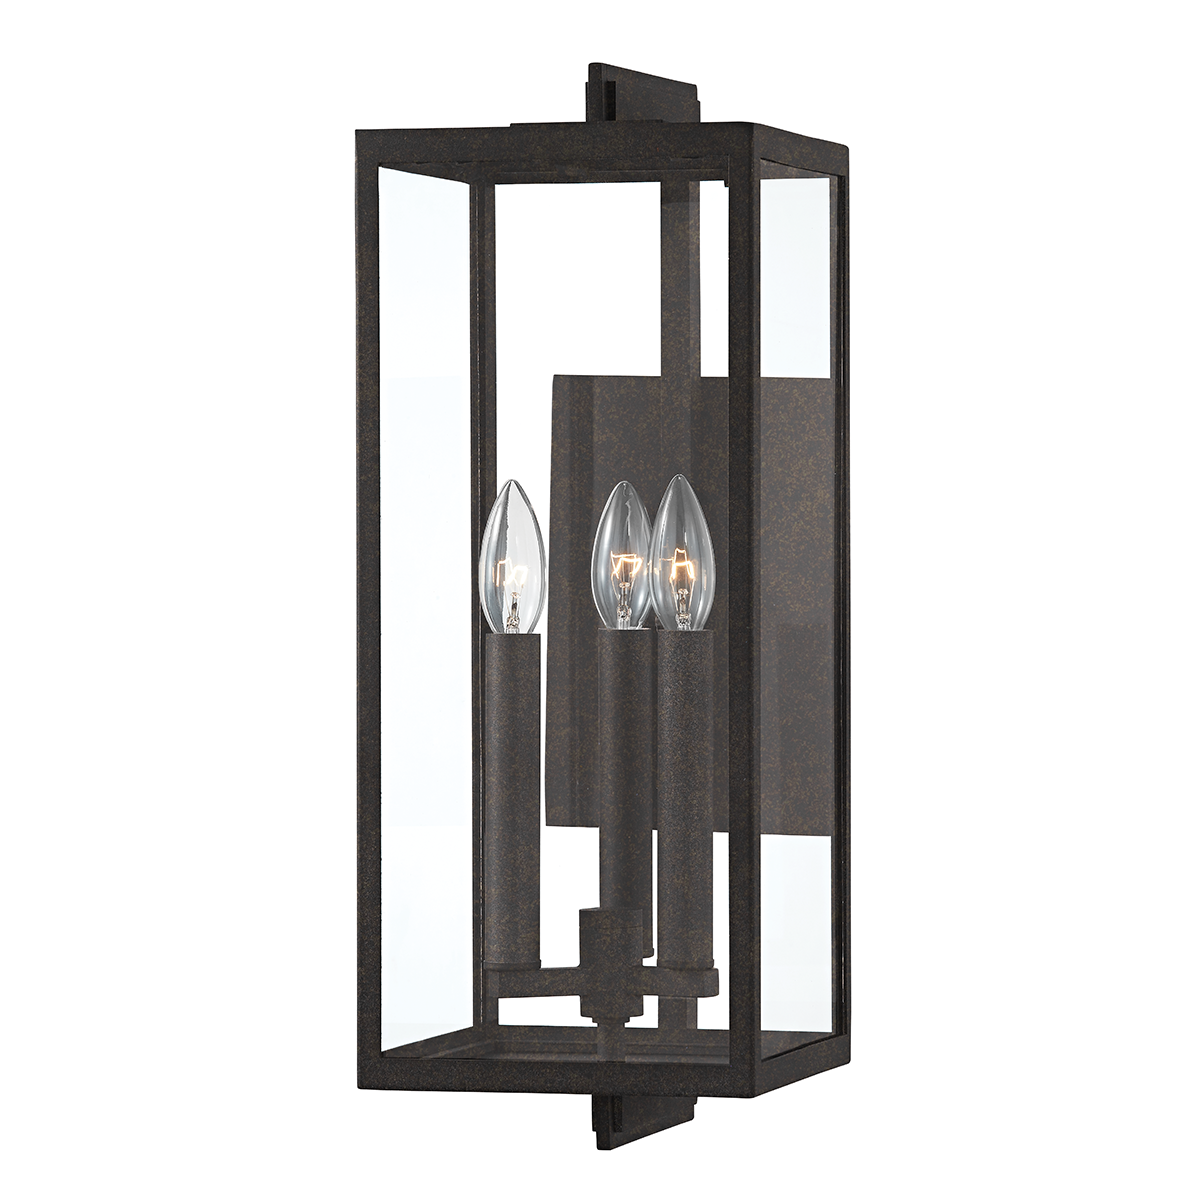 Troy NICO 3 LIGHT EXTERIOR WALL SCONCE B5513 Outdoor l Wall Troy Lighting FRENCH IRON  